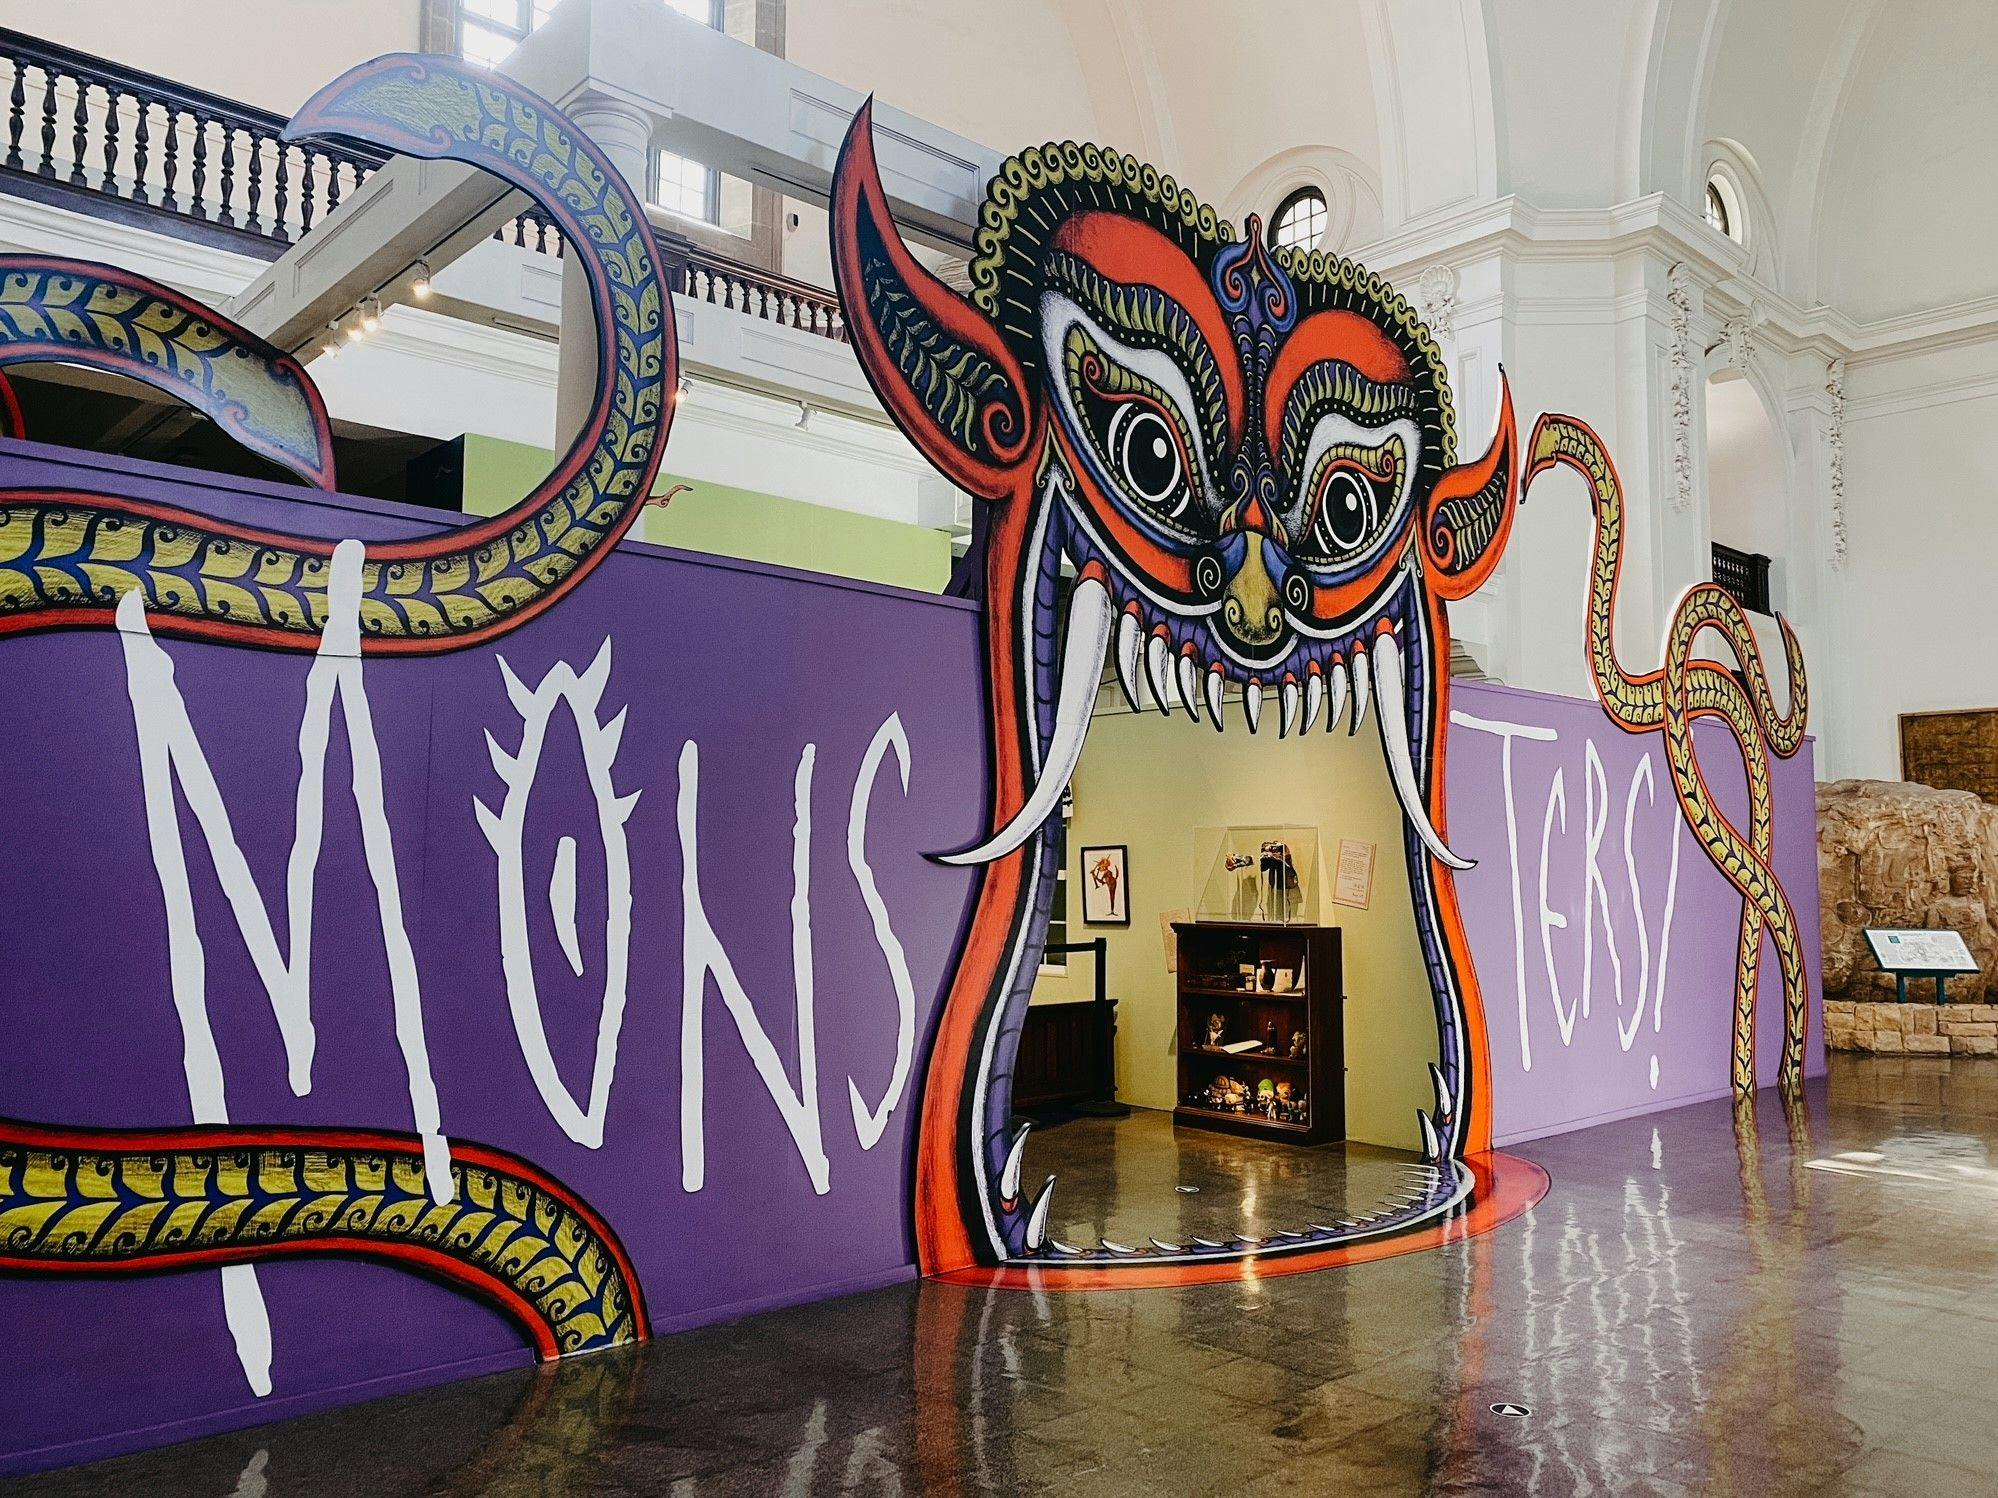 The "Monsters!" exhibit featuring a large wall where a red, demon-like creature's mouth is the exhibit entrance. The exhibit title surrounds it in large, white font.